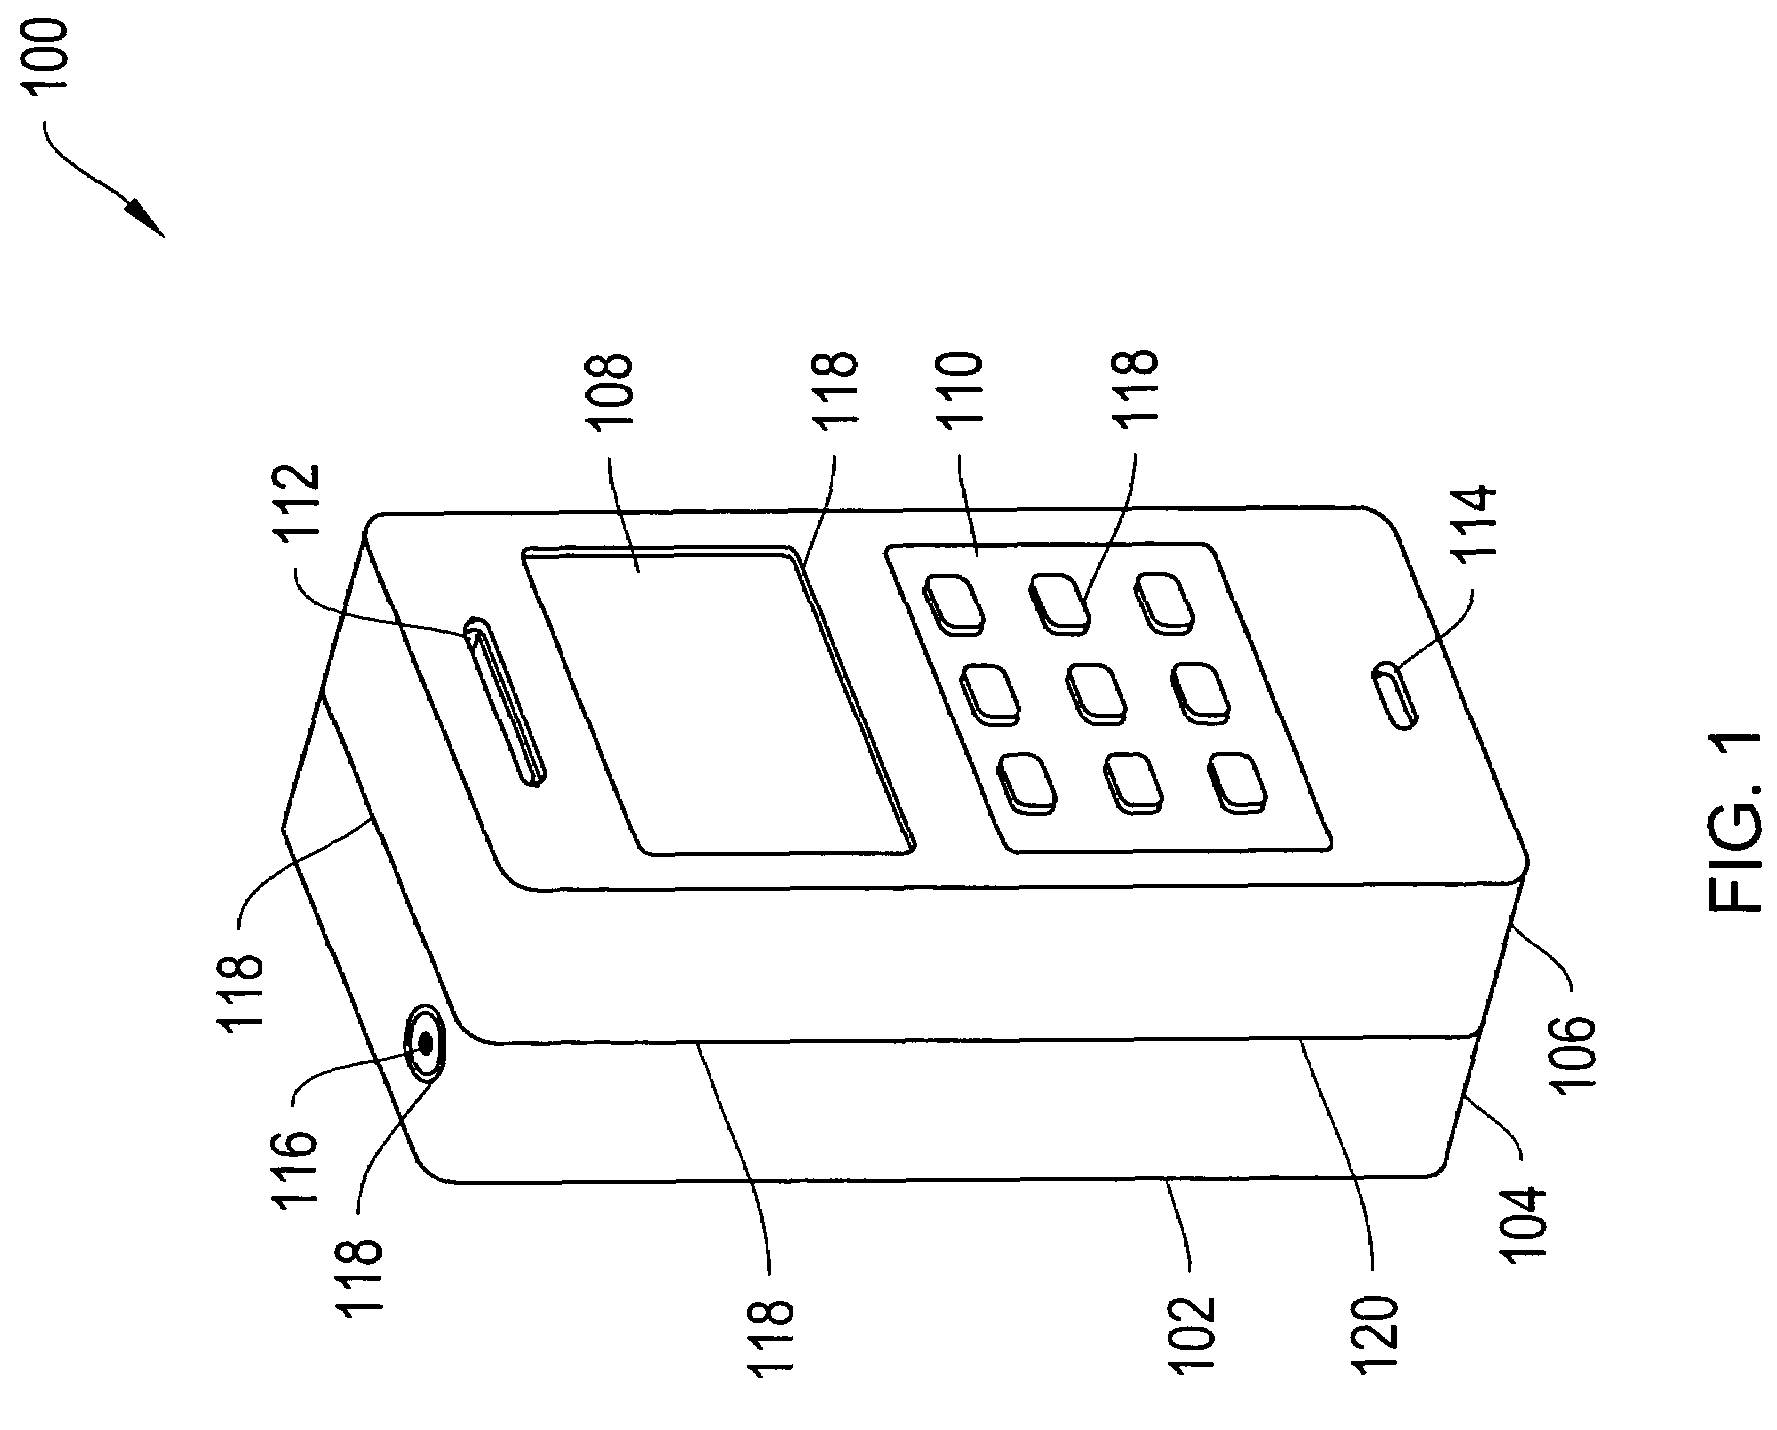 Acoustic assembly for personal media device